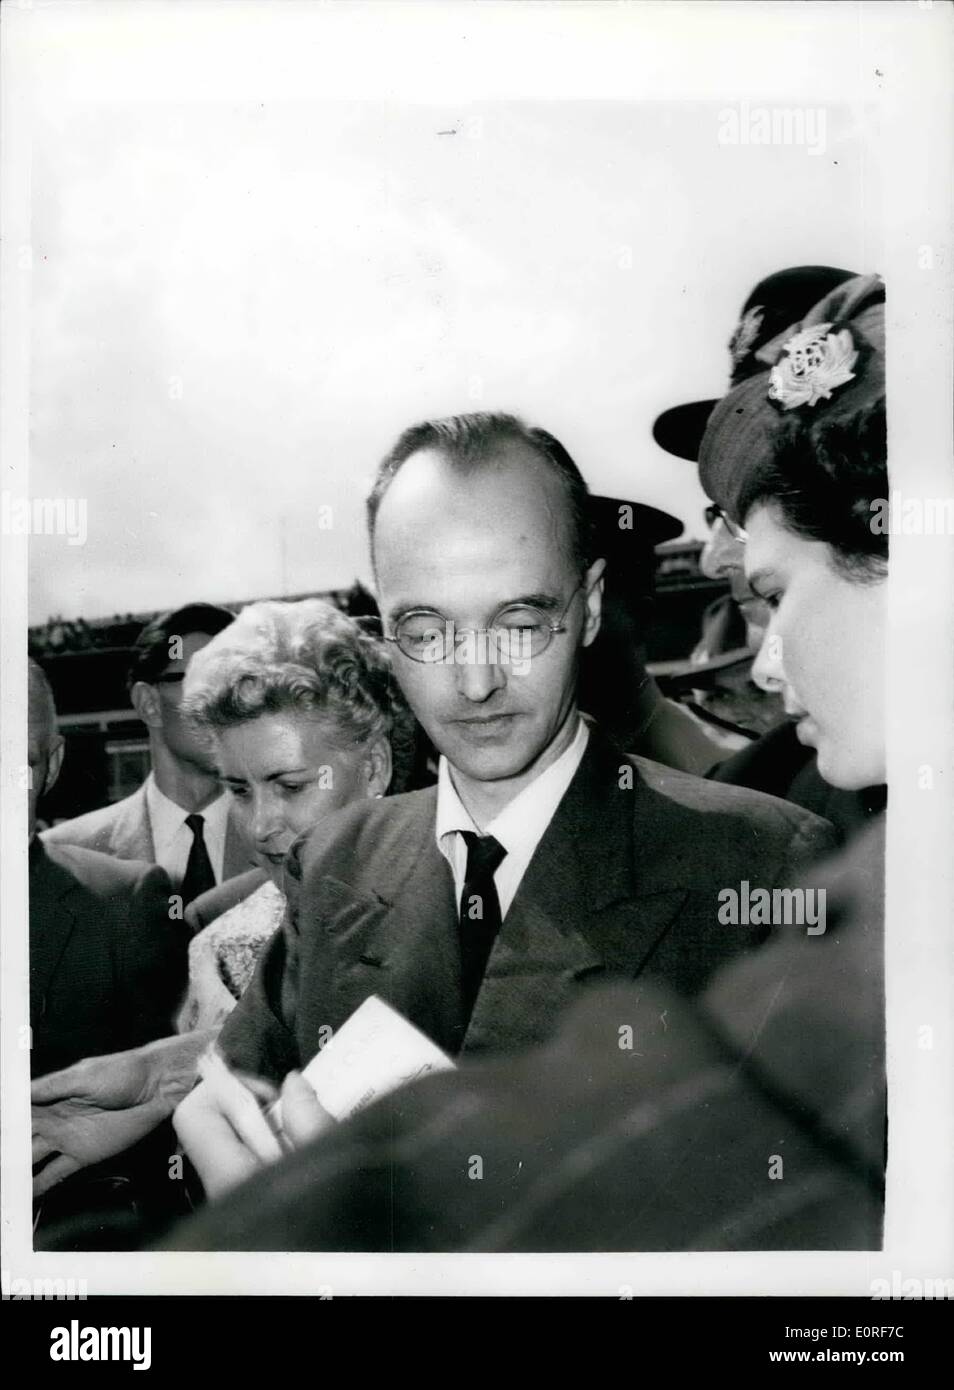 Jun. 06, 1959 - Atom Traitor -Klaus Fuchs Flies To East Germany: Klaus Fuchs was yesterday released from Wakefield Jail - having completed 9 1/2 years of his sentence - for disclosing atom secrets.. He travelled to London Airport - and then on Polish Airways machine to East Germany. Photo Shows: Klaus Fuchs - at London Airport yesterday. The woman is not named. Stock Photo